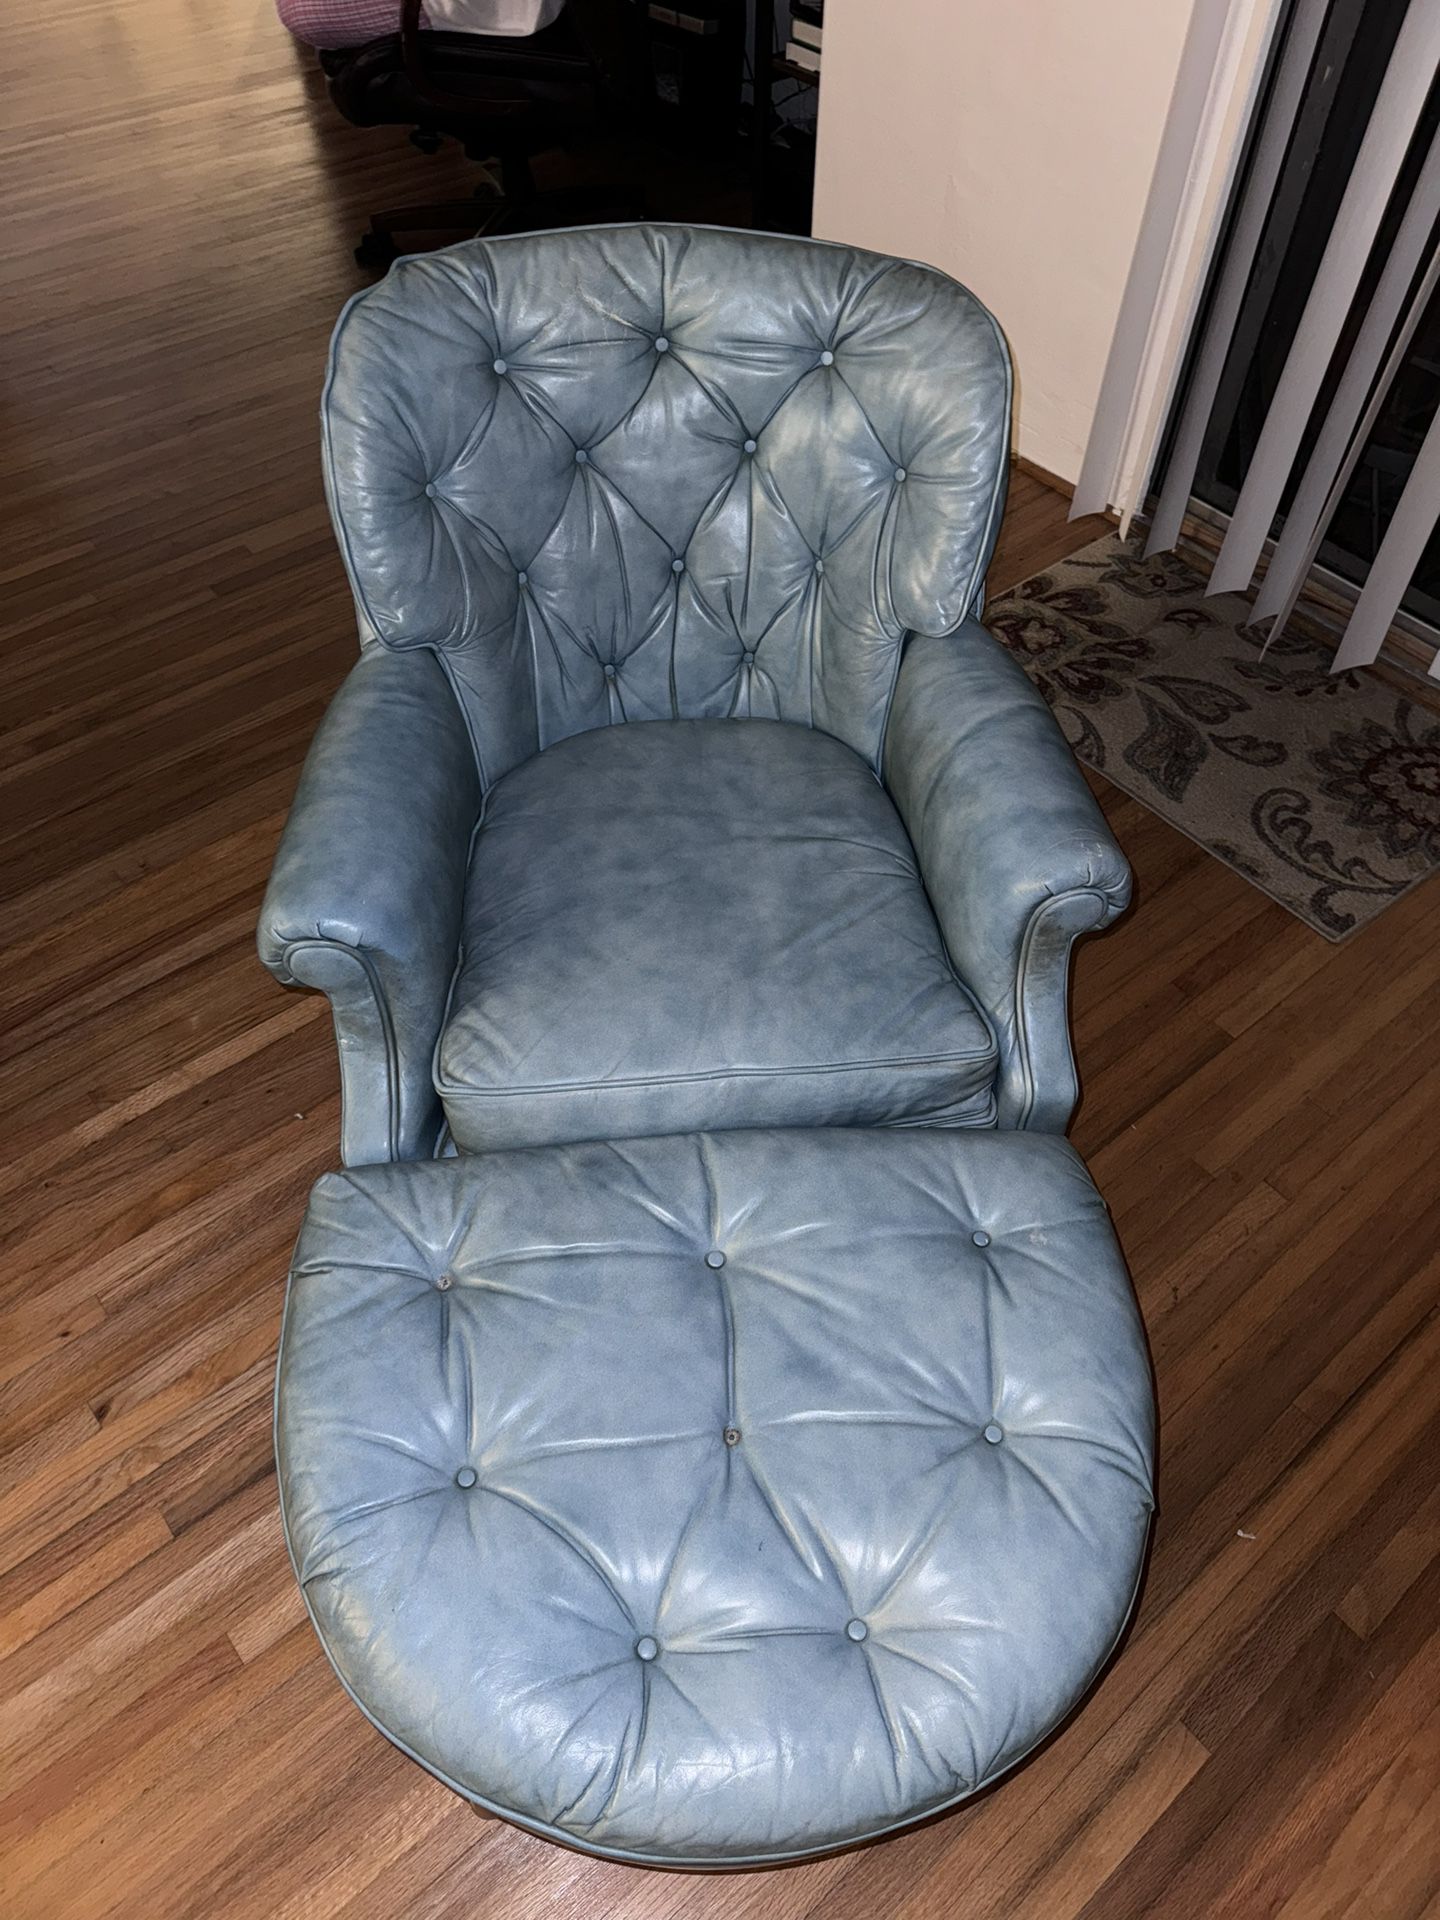 Vintage Teal Leather Chair And Ottoman 